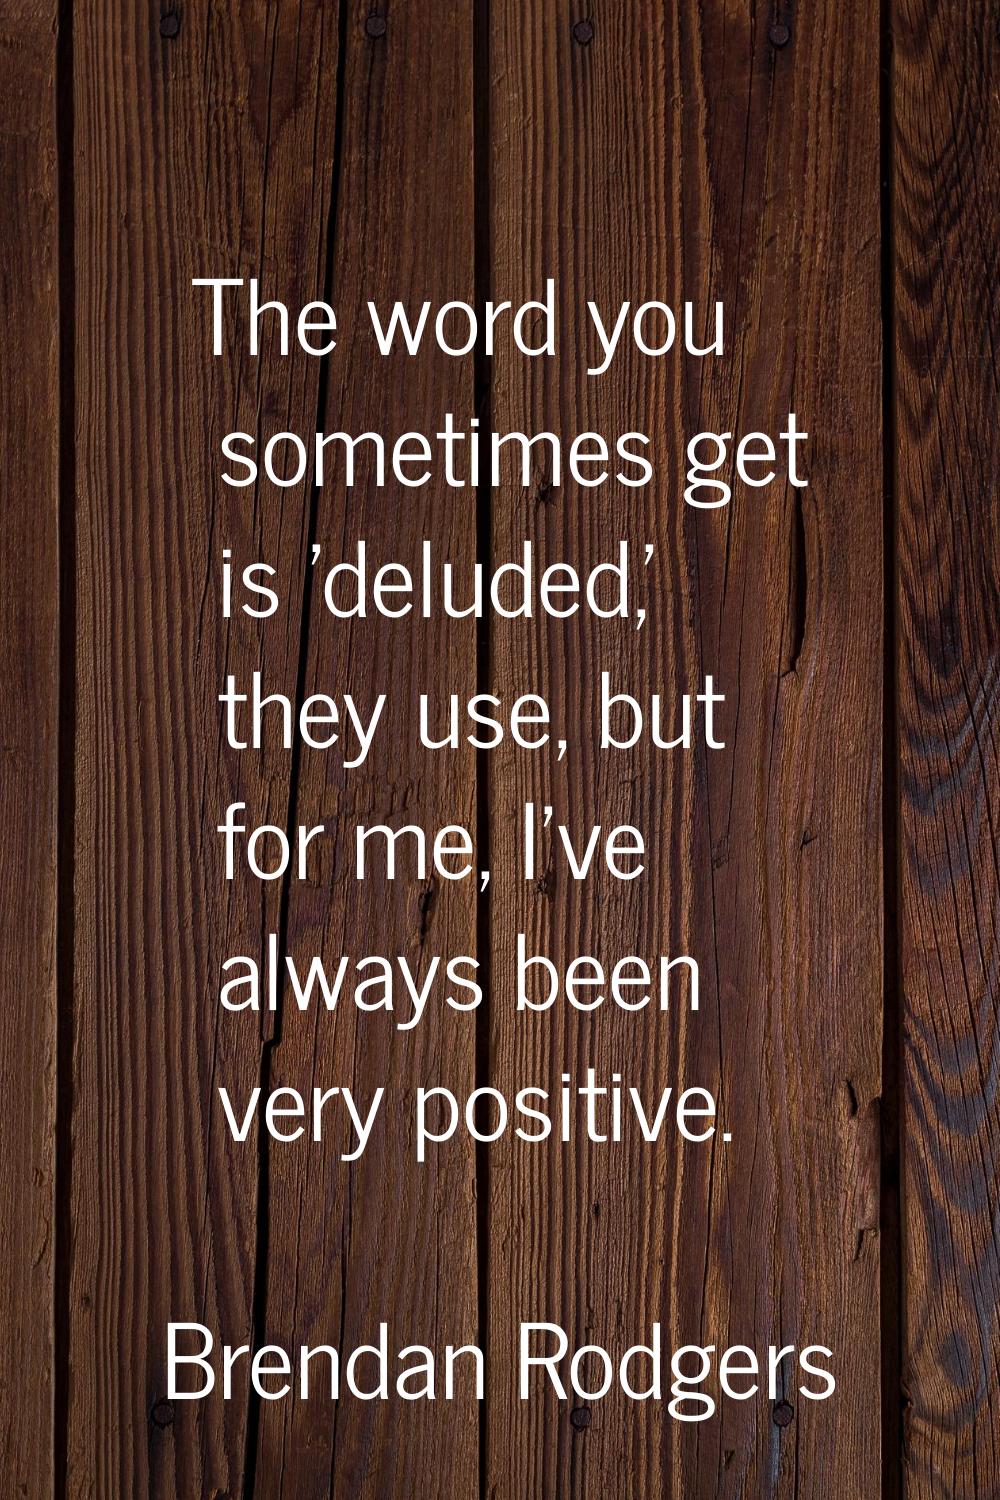 The word you sometimes get is 'deluded,' they use, but for me, I've always been very positive.